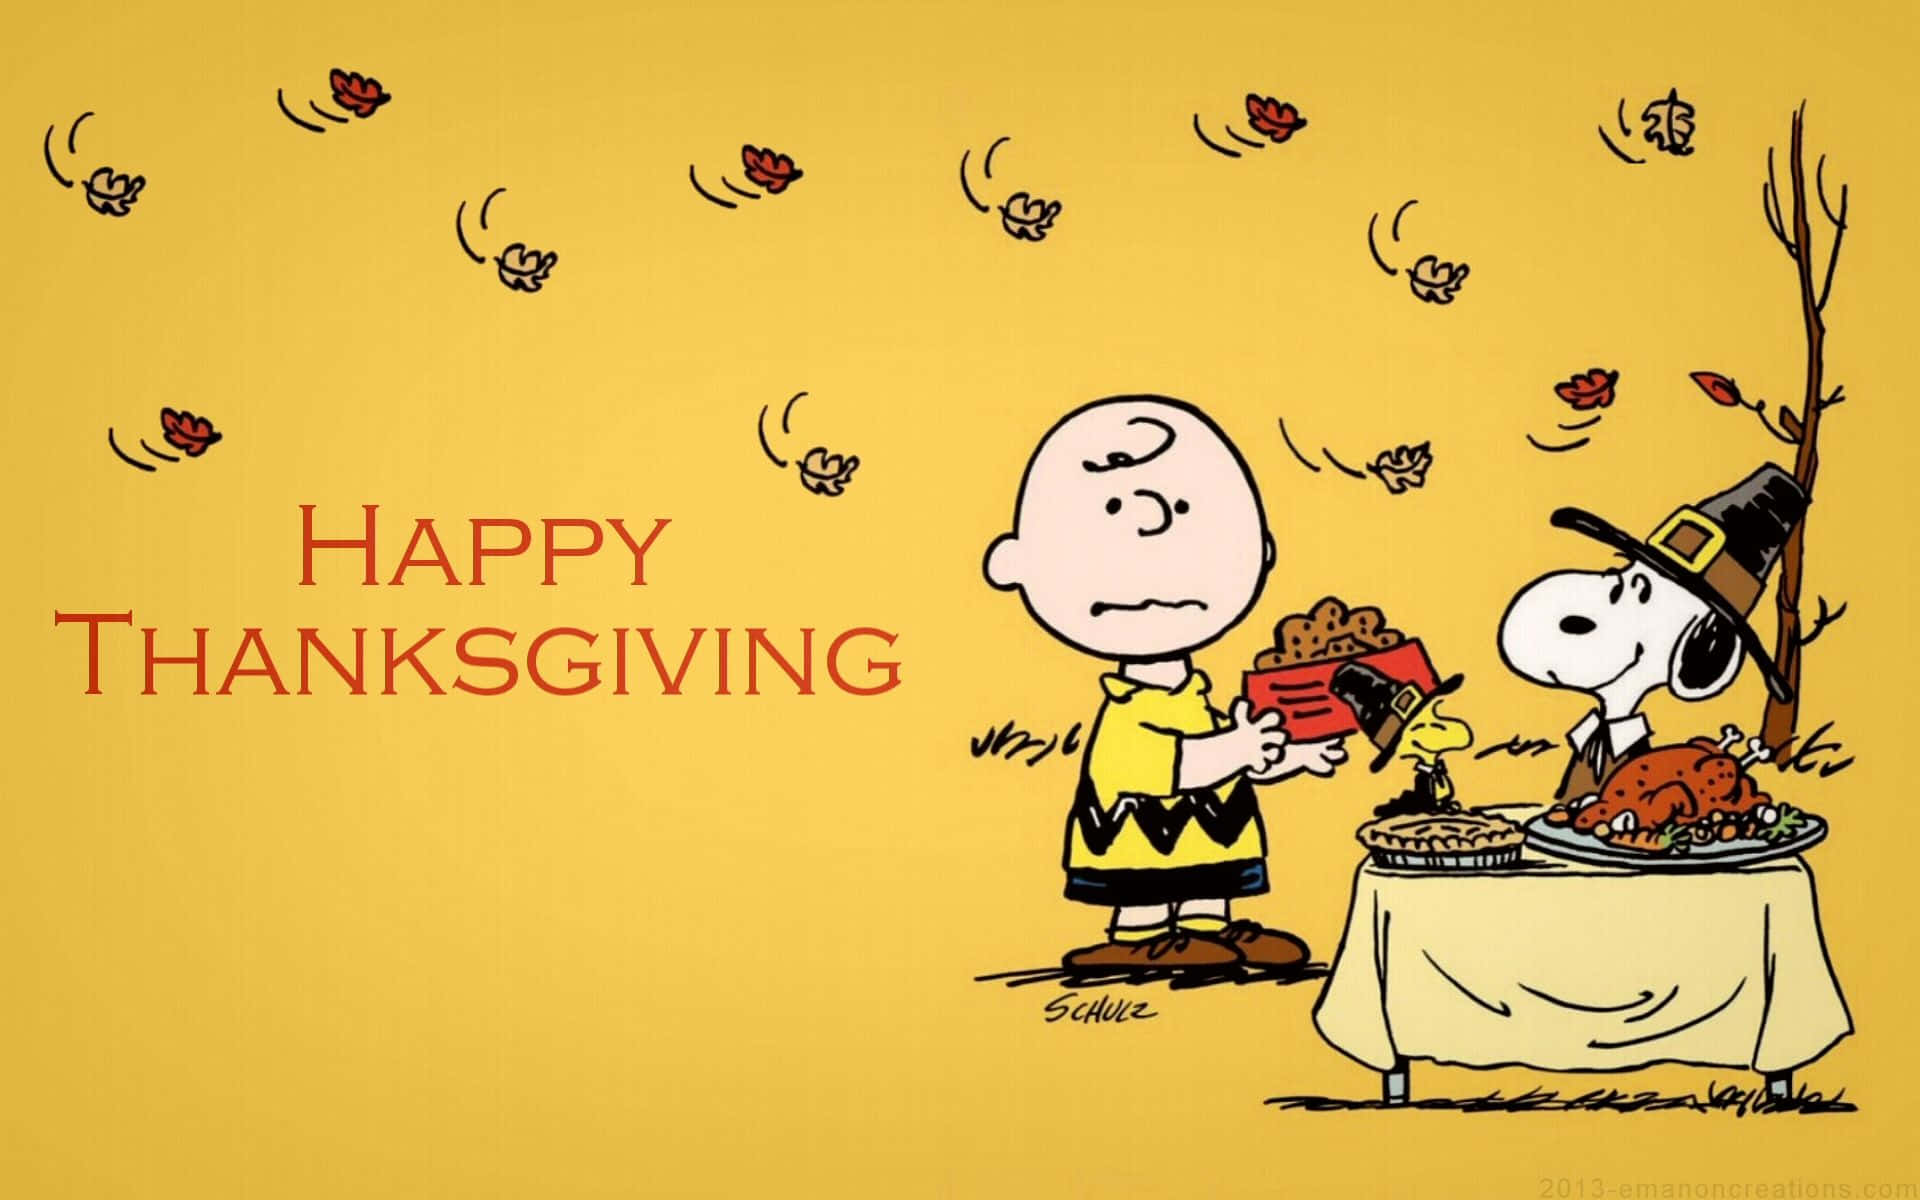 "Make Thanksgiving even more festive with a dose of hilarious humour!" Wallpaper